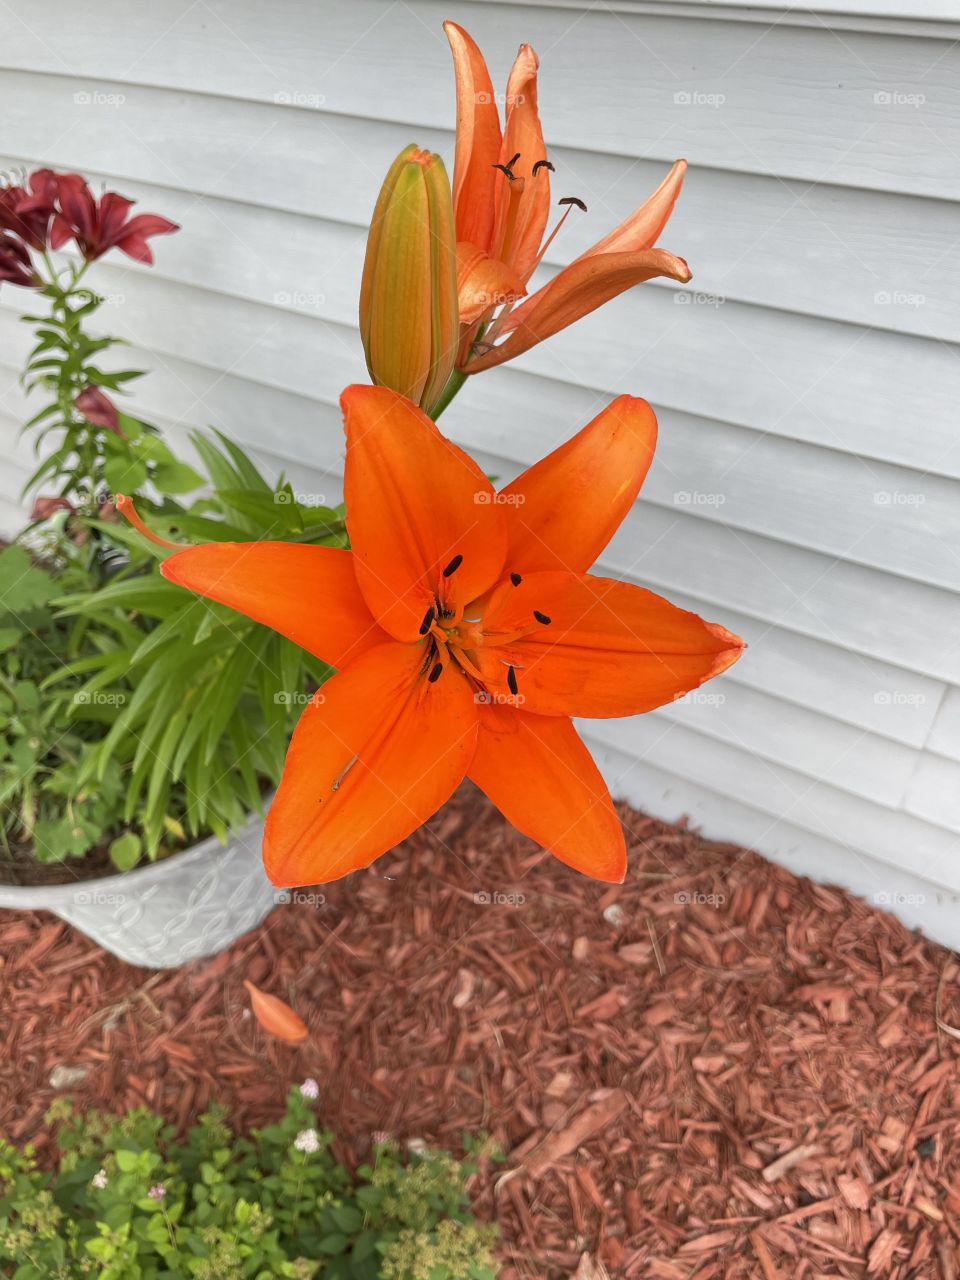 Just a beautiful lily !